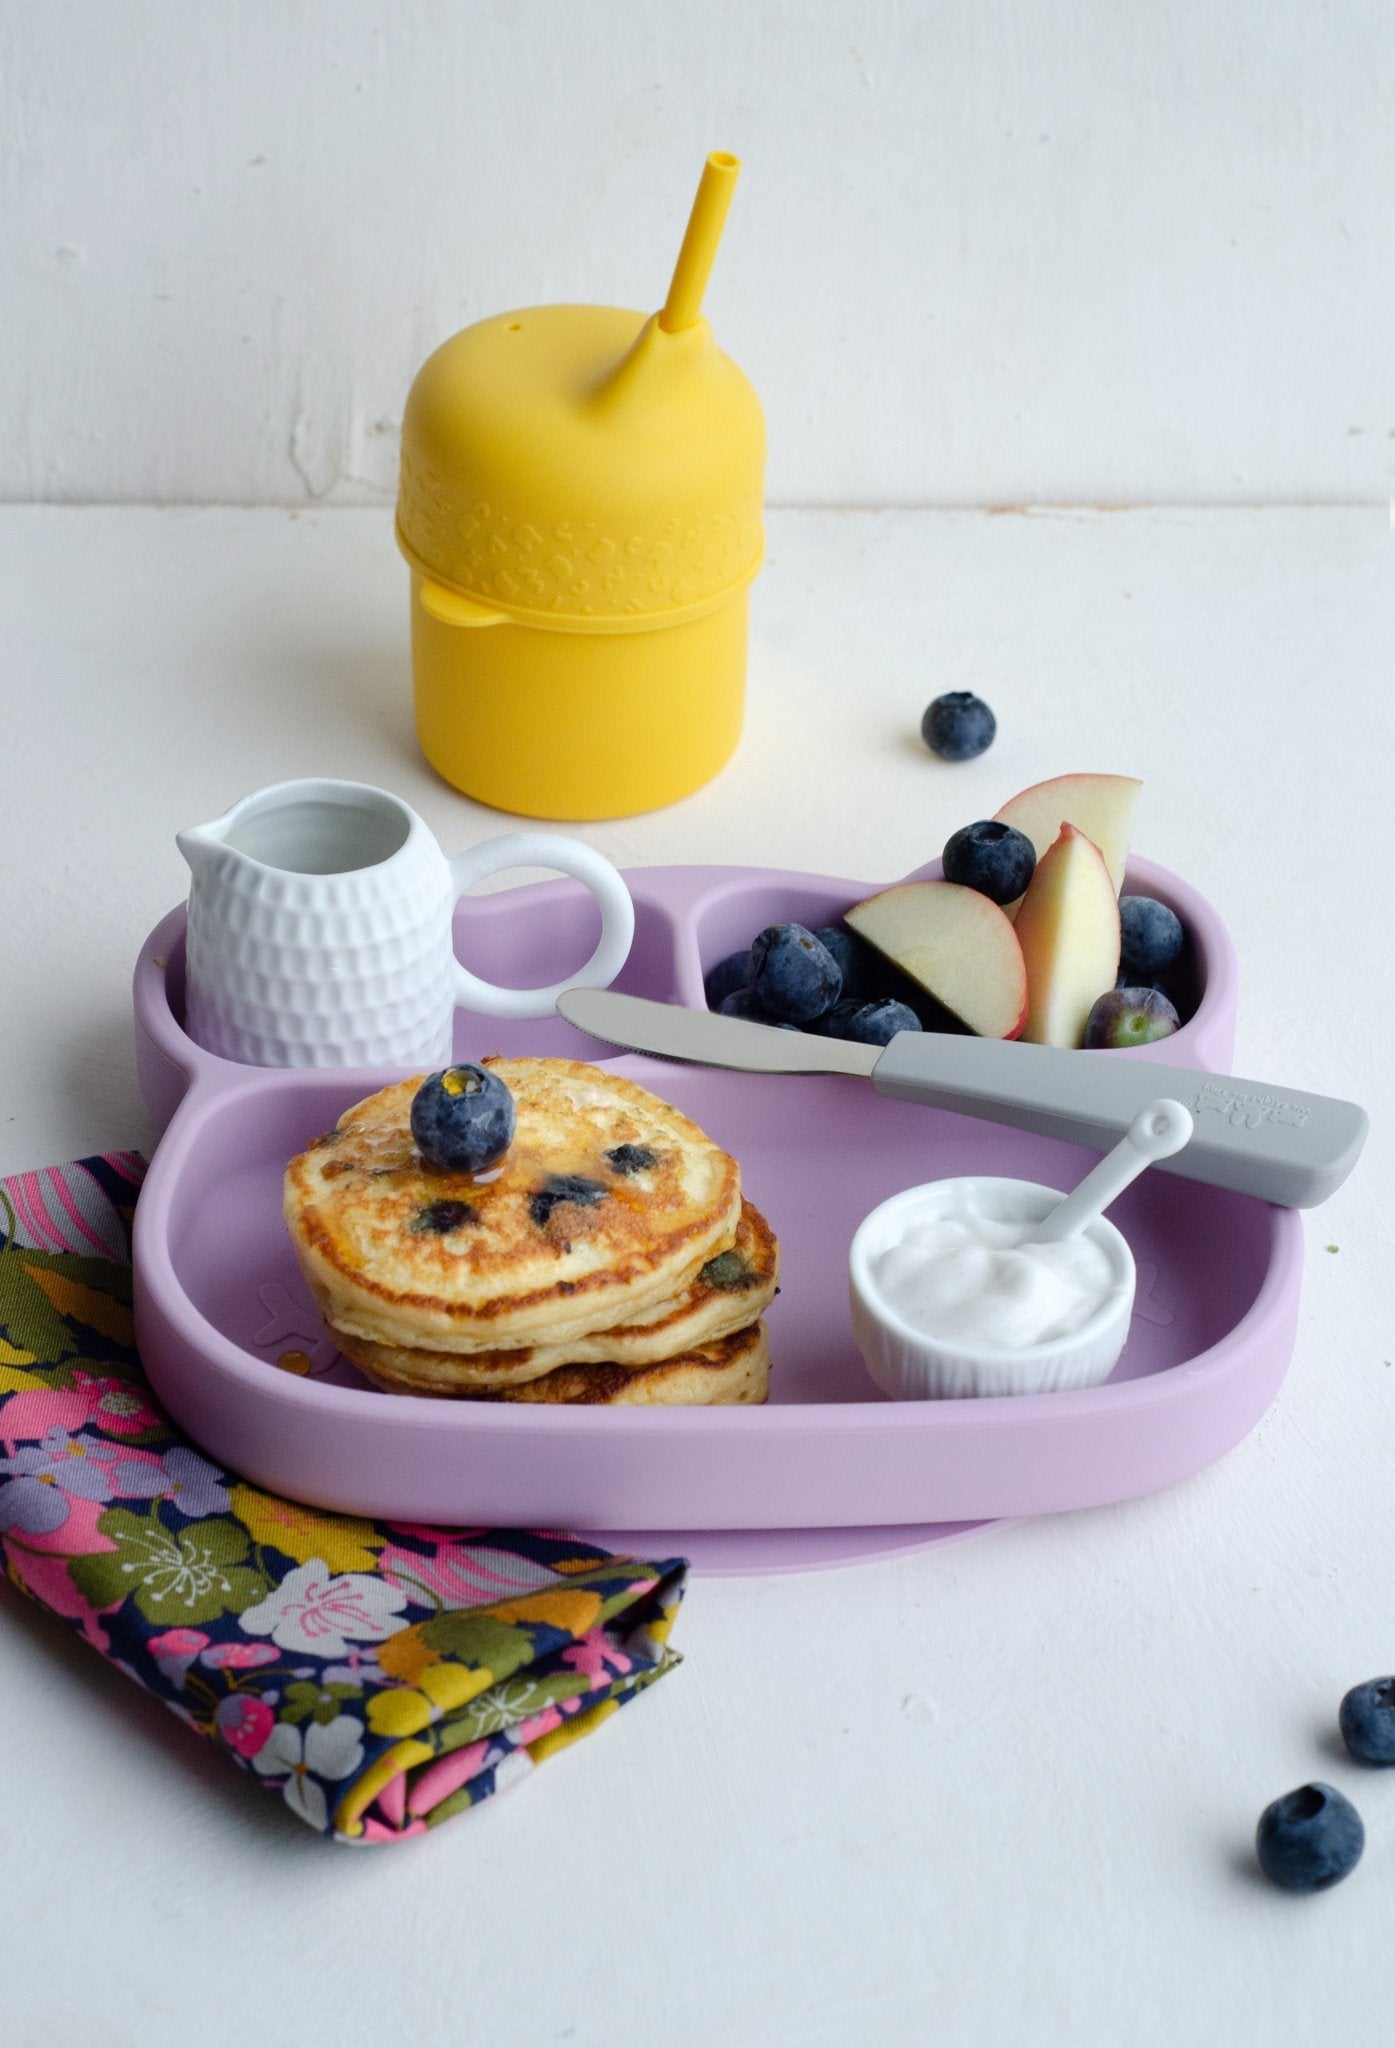 Delicious Baby-Led Weaning Recipe: Blueberry Pancakes